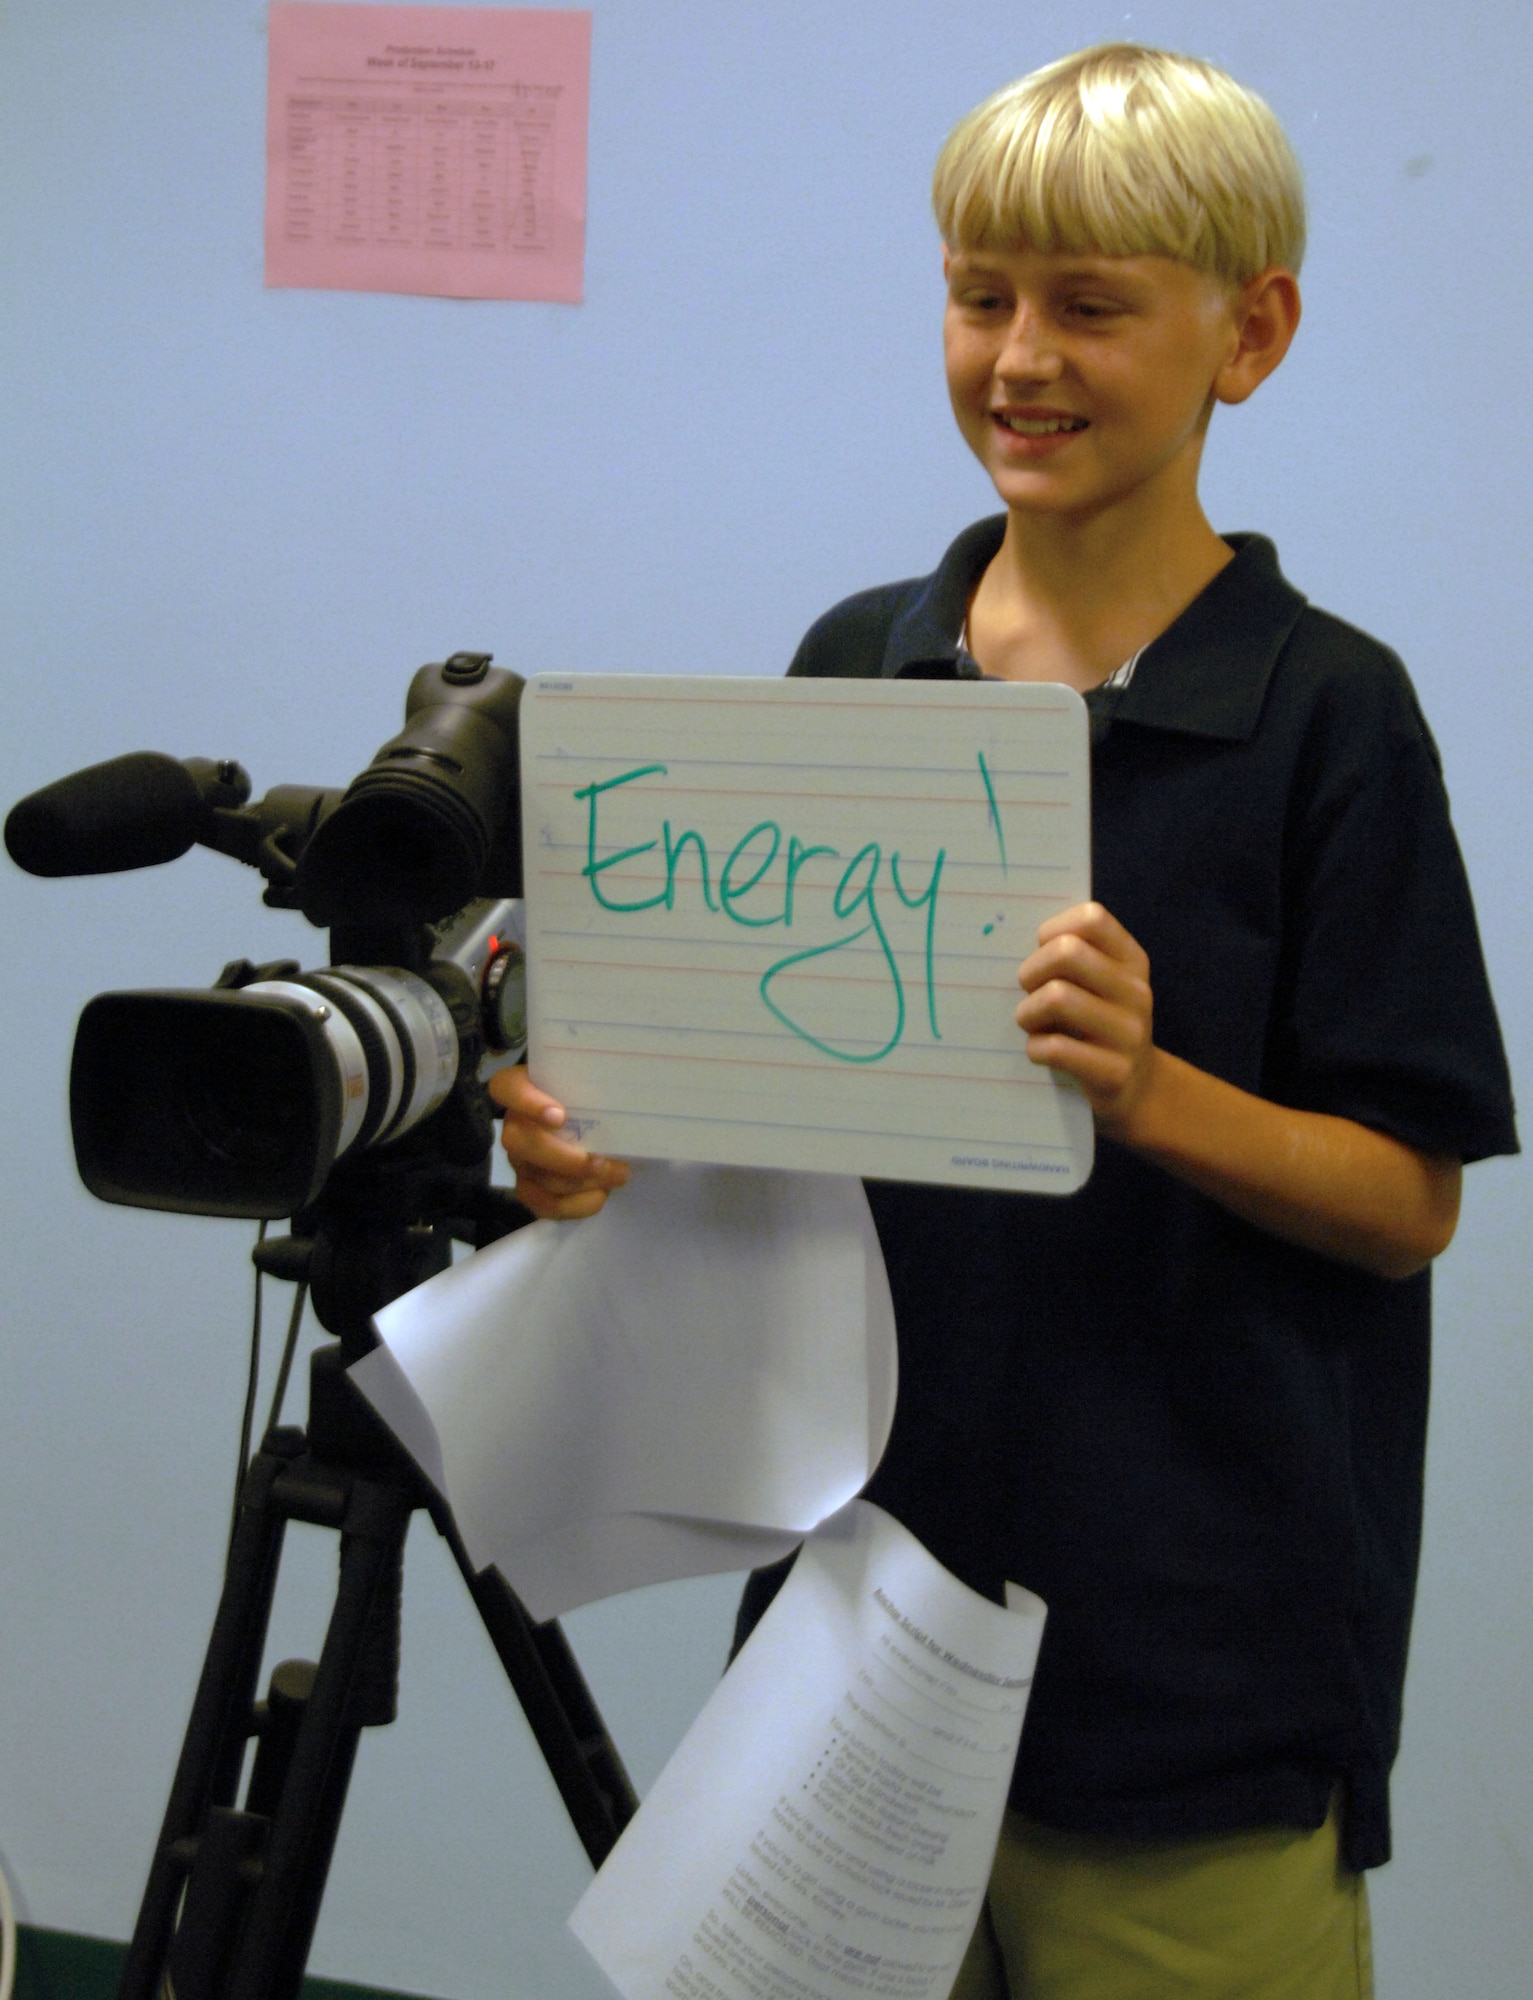 Arthur Hinsvark, an 8th grade student at Andersen Middle School, supervises filming and directs on-camera anchors during a KAMS-TV morning broadcast. The KAMS-TV crew is comprised of several students who work together to produce a show featuring news, sports and announcements that is broadcasted throughout the school. (U.S. Air Force photo by Airman Whitney Amstutz)